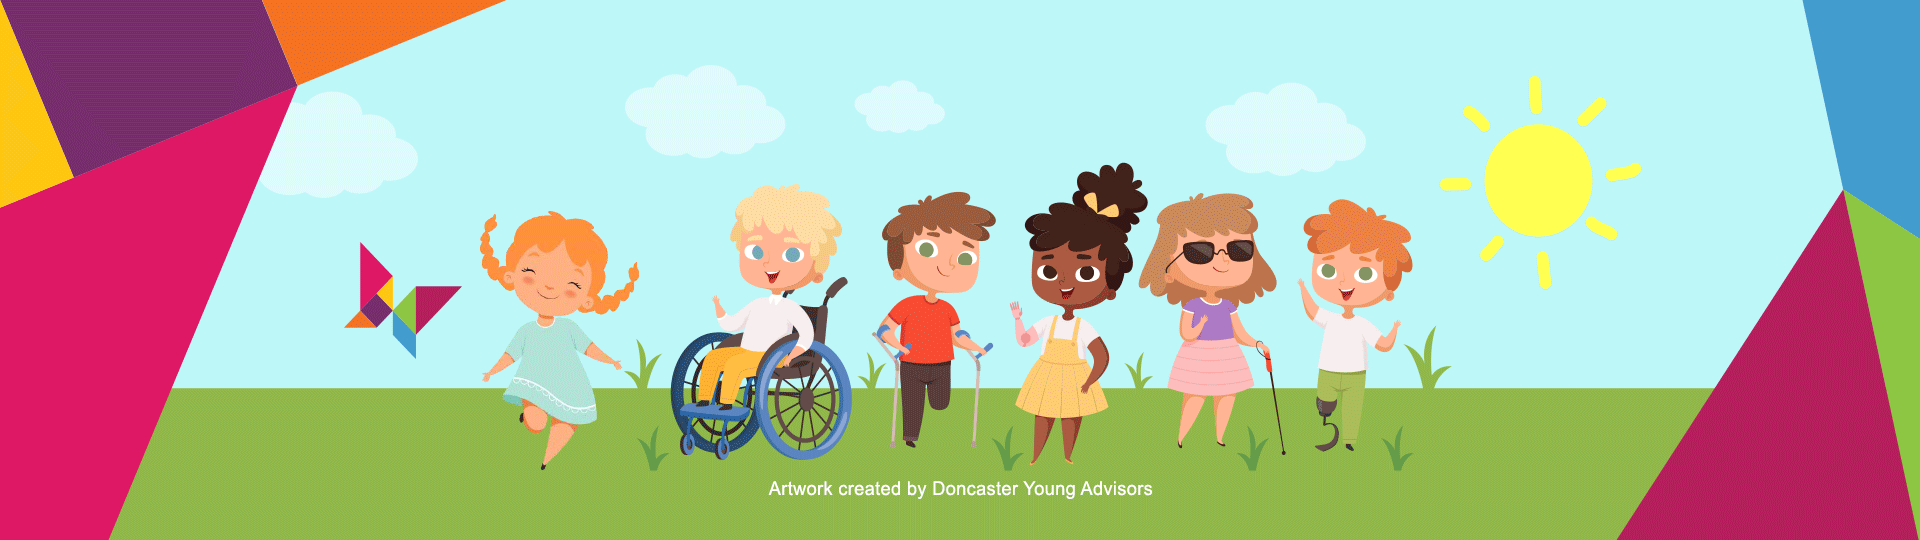 Illustration of children as created by Doncaster Yound Advisors